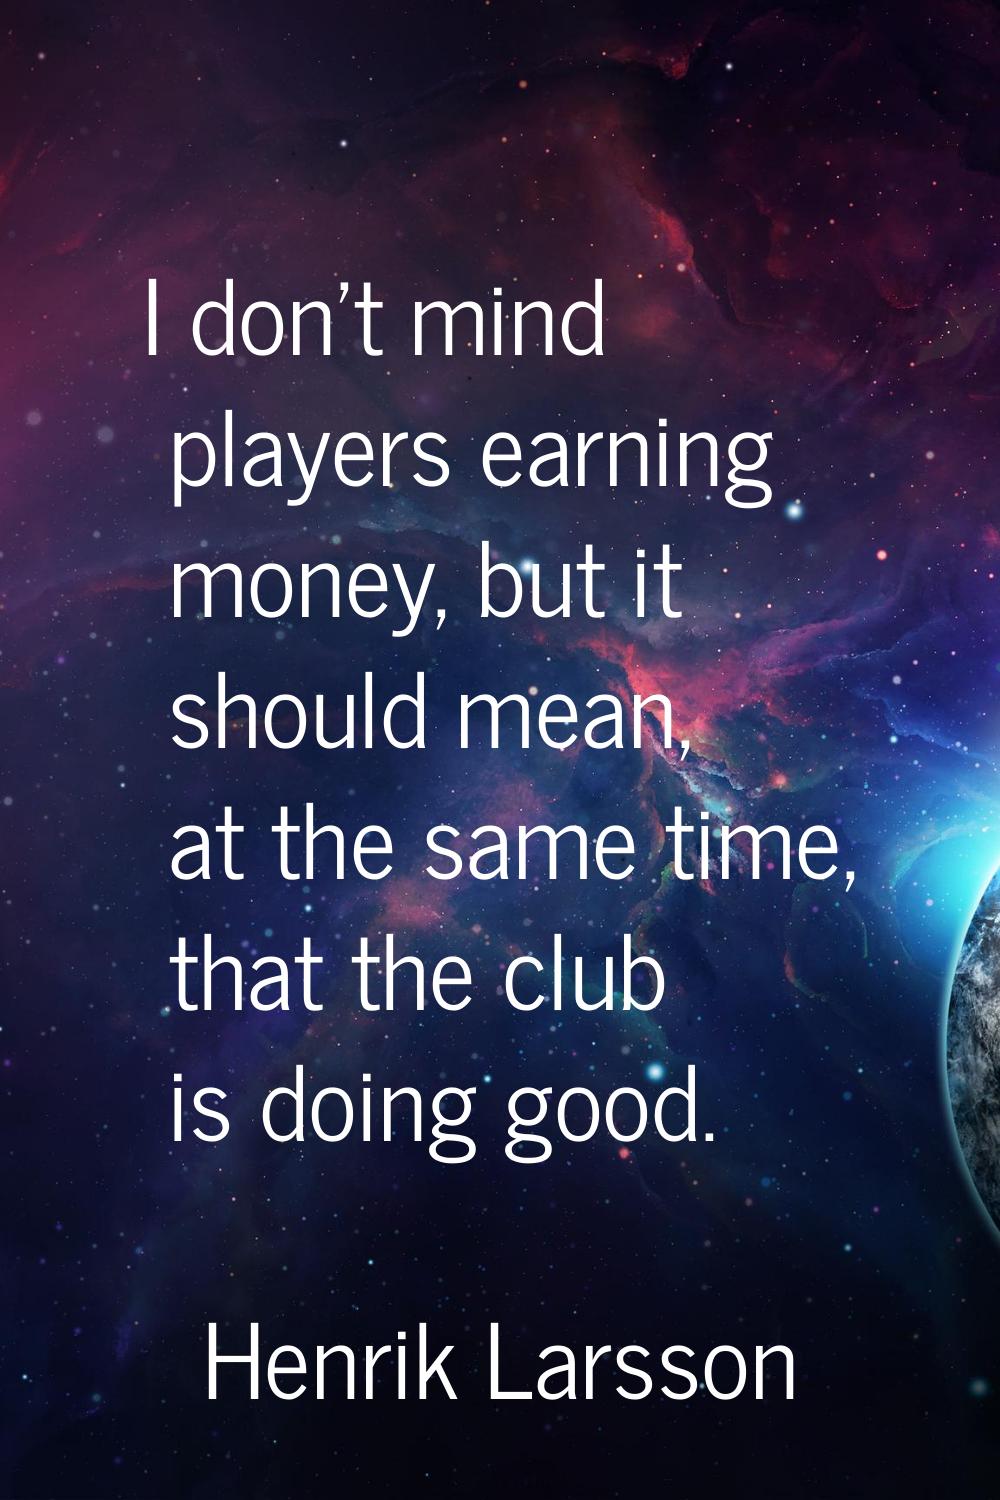 I don't mind players earning money, but it should mean, at the same time, that the club is doing go